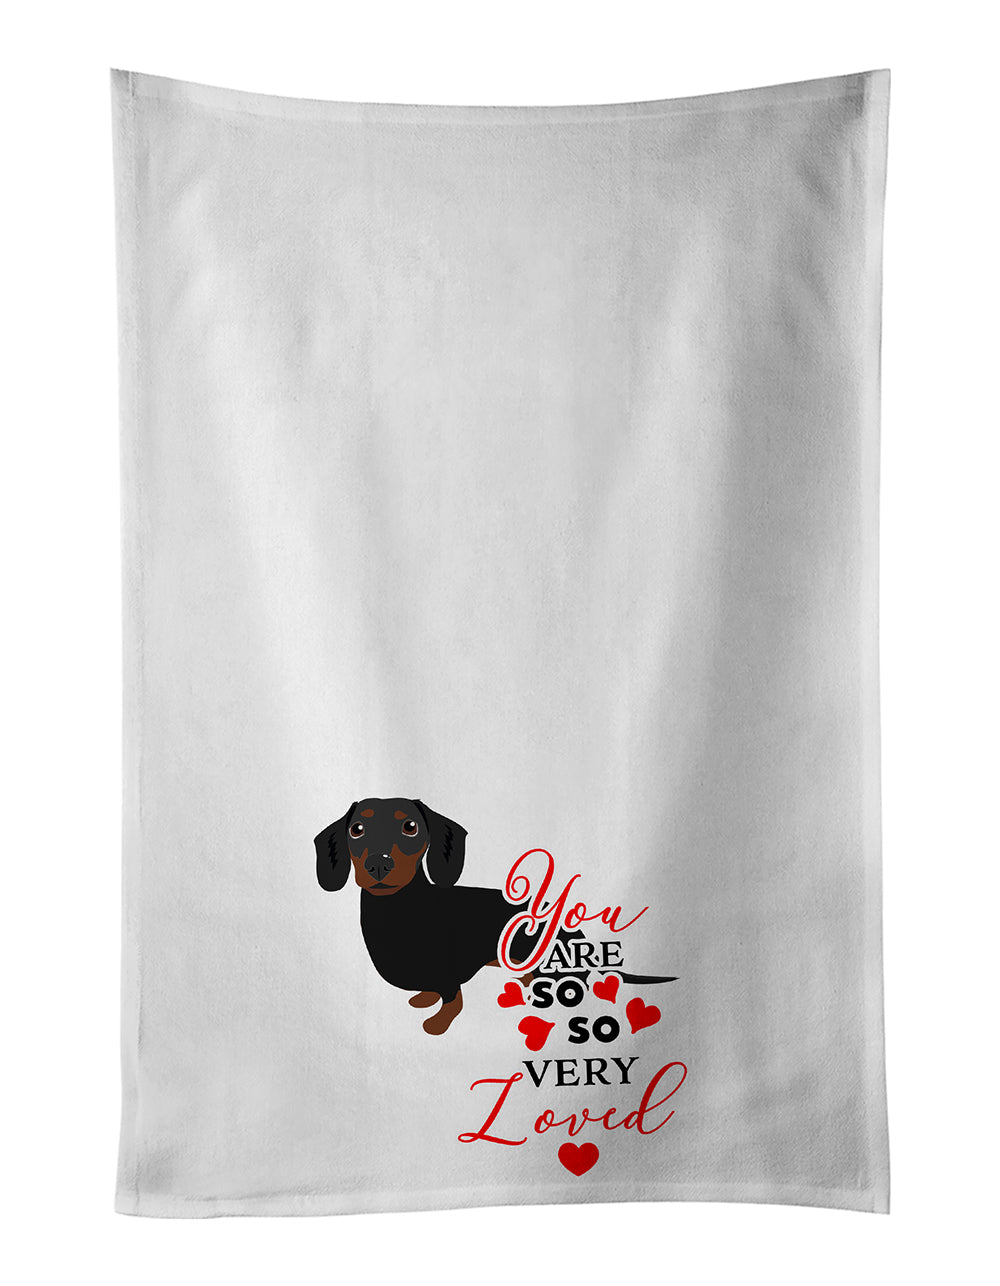 Buy this Dachshund Black and Tan #1so Loved White Kitchen Towel Set of 2